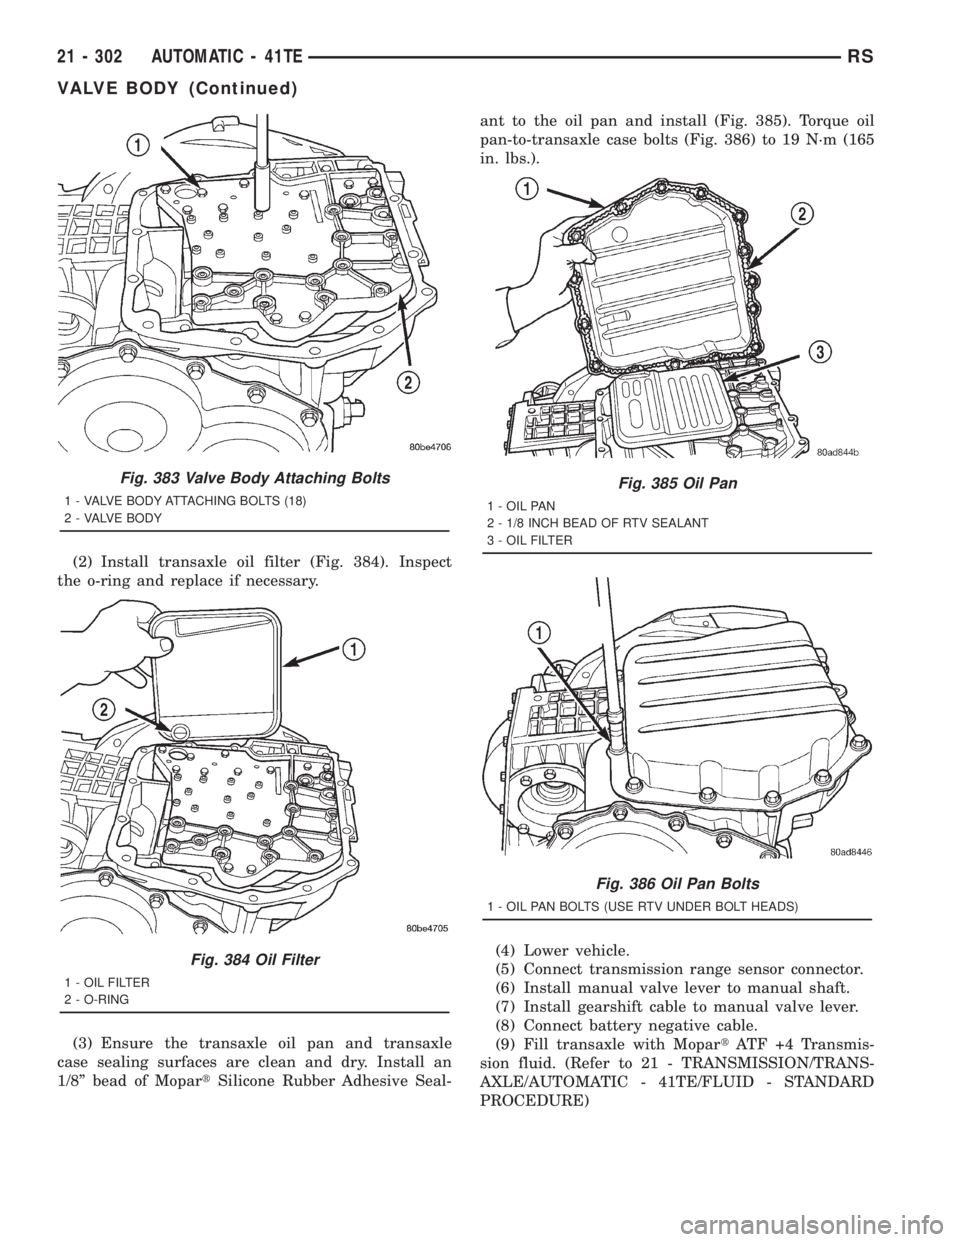 CHRYSLER VOYAGER 2001  Service Manual (2) Install transaxle oil filter (Fig. 384). Inspect
the o-ring and replace if necessary.
(3) Ensure the transaxle oil pan and transaxle
case sealing surfaces are clean and dry. Install an
1/8º bead 